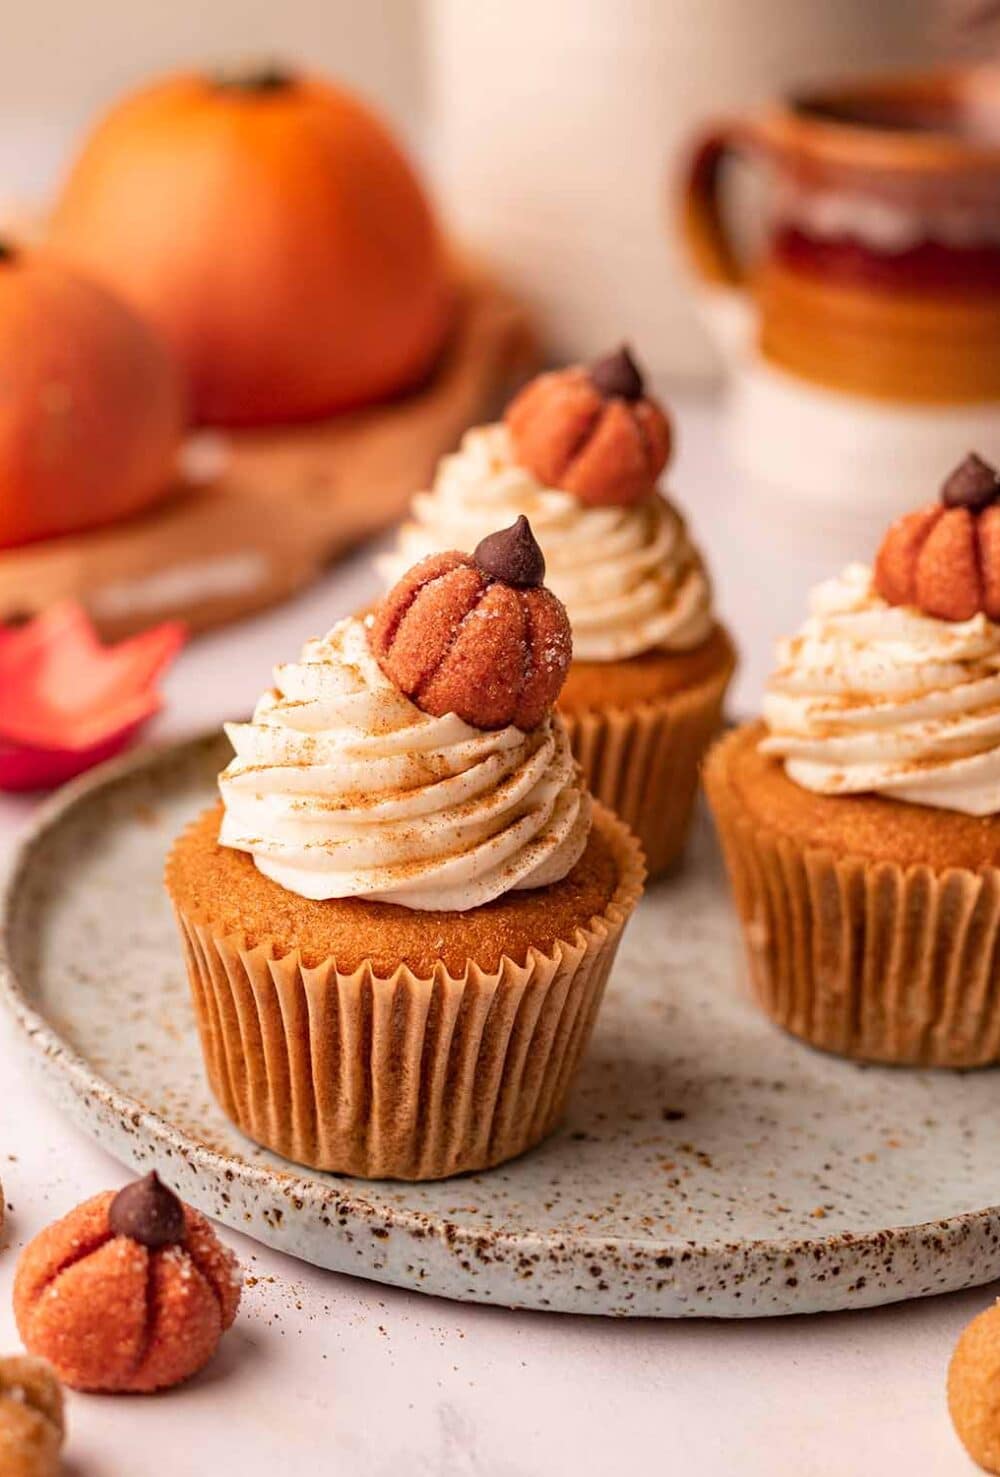 Three pumpkin cupcakes on plate surrounded by mini pumpkins. The cupcakes are decorated with frosting and edible pumpkin decorations.